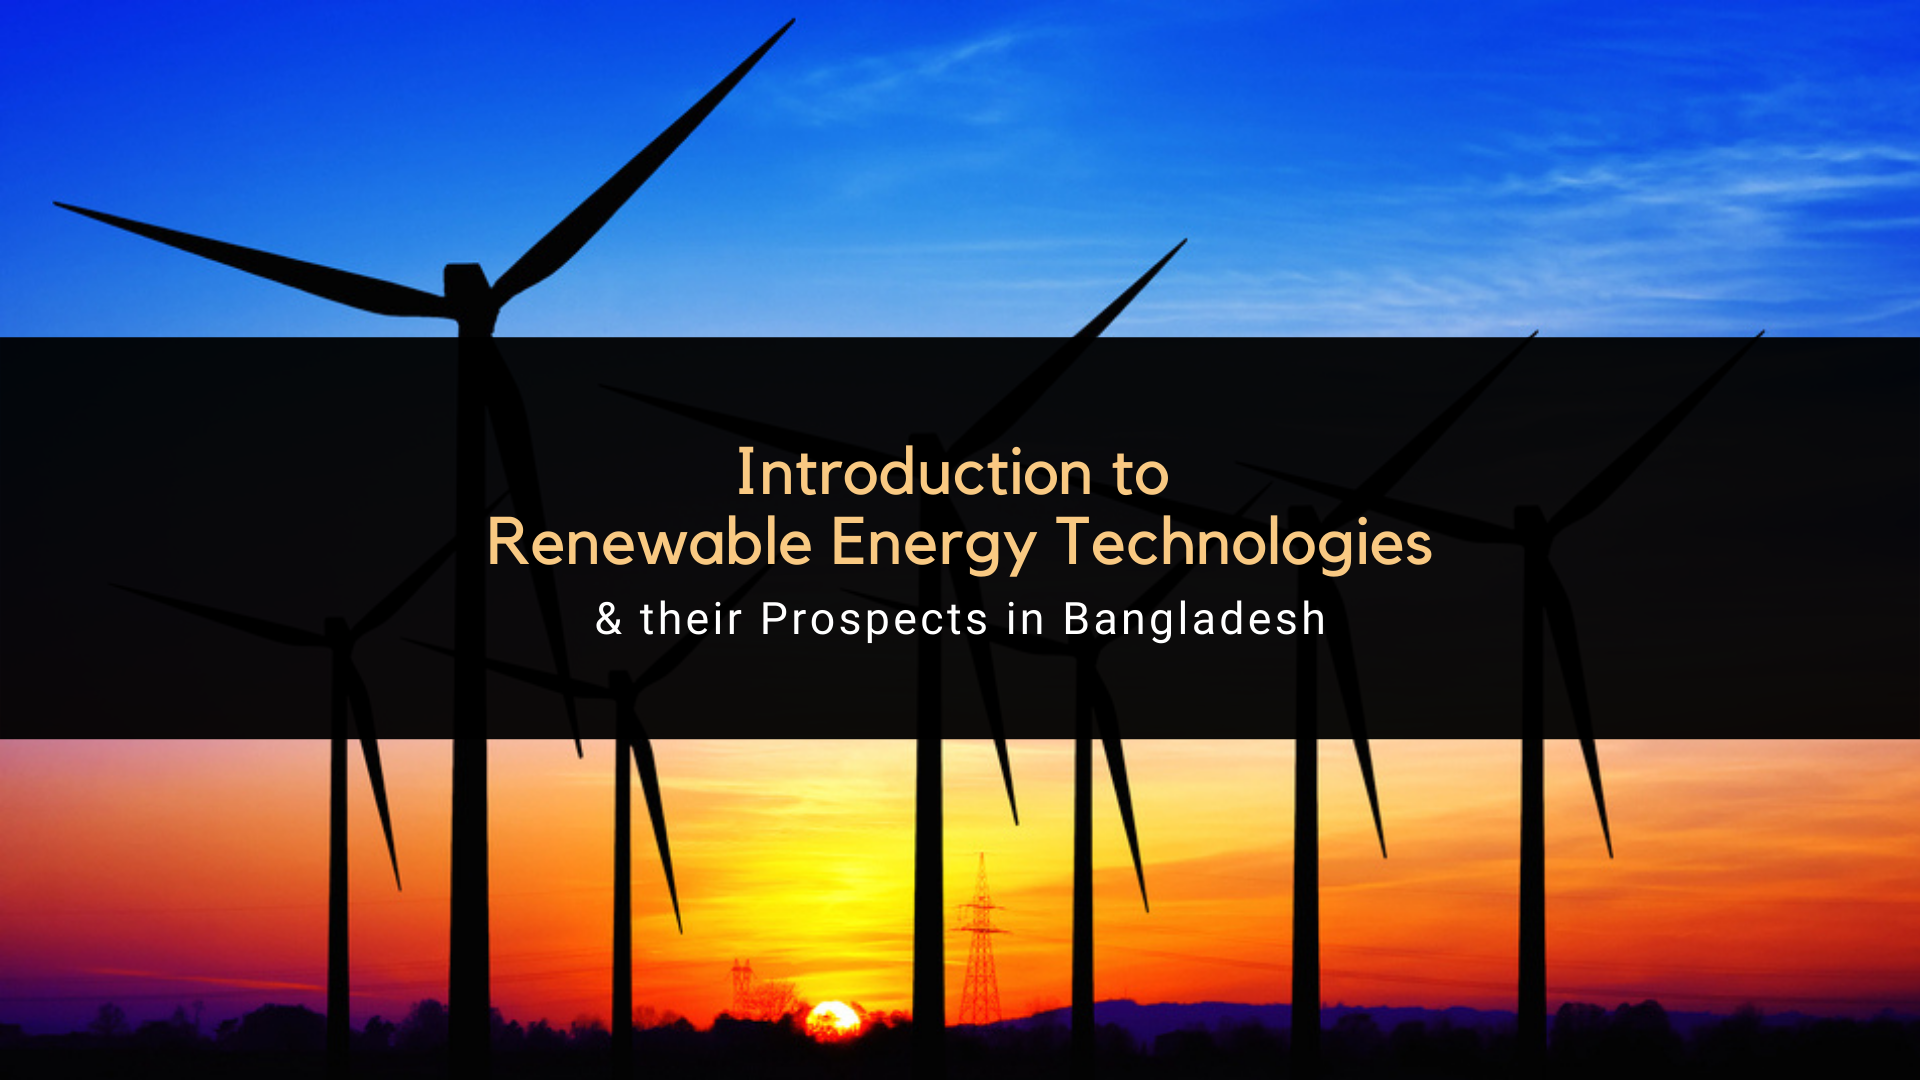 Introduction to Renewable Energy Technologies course image